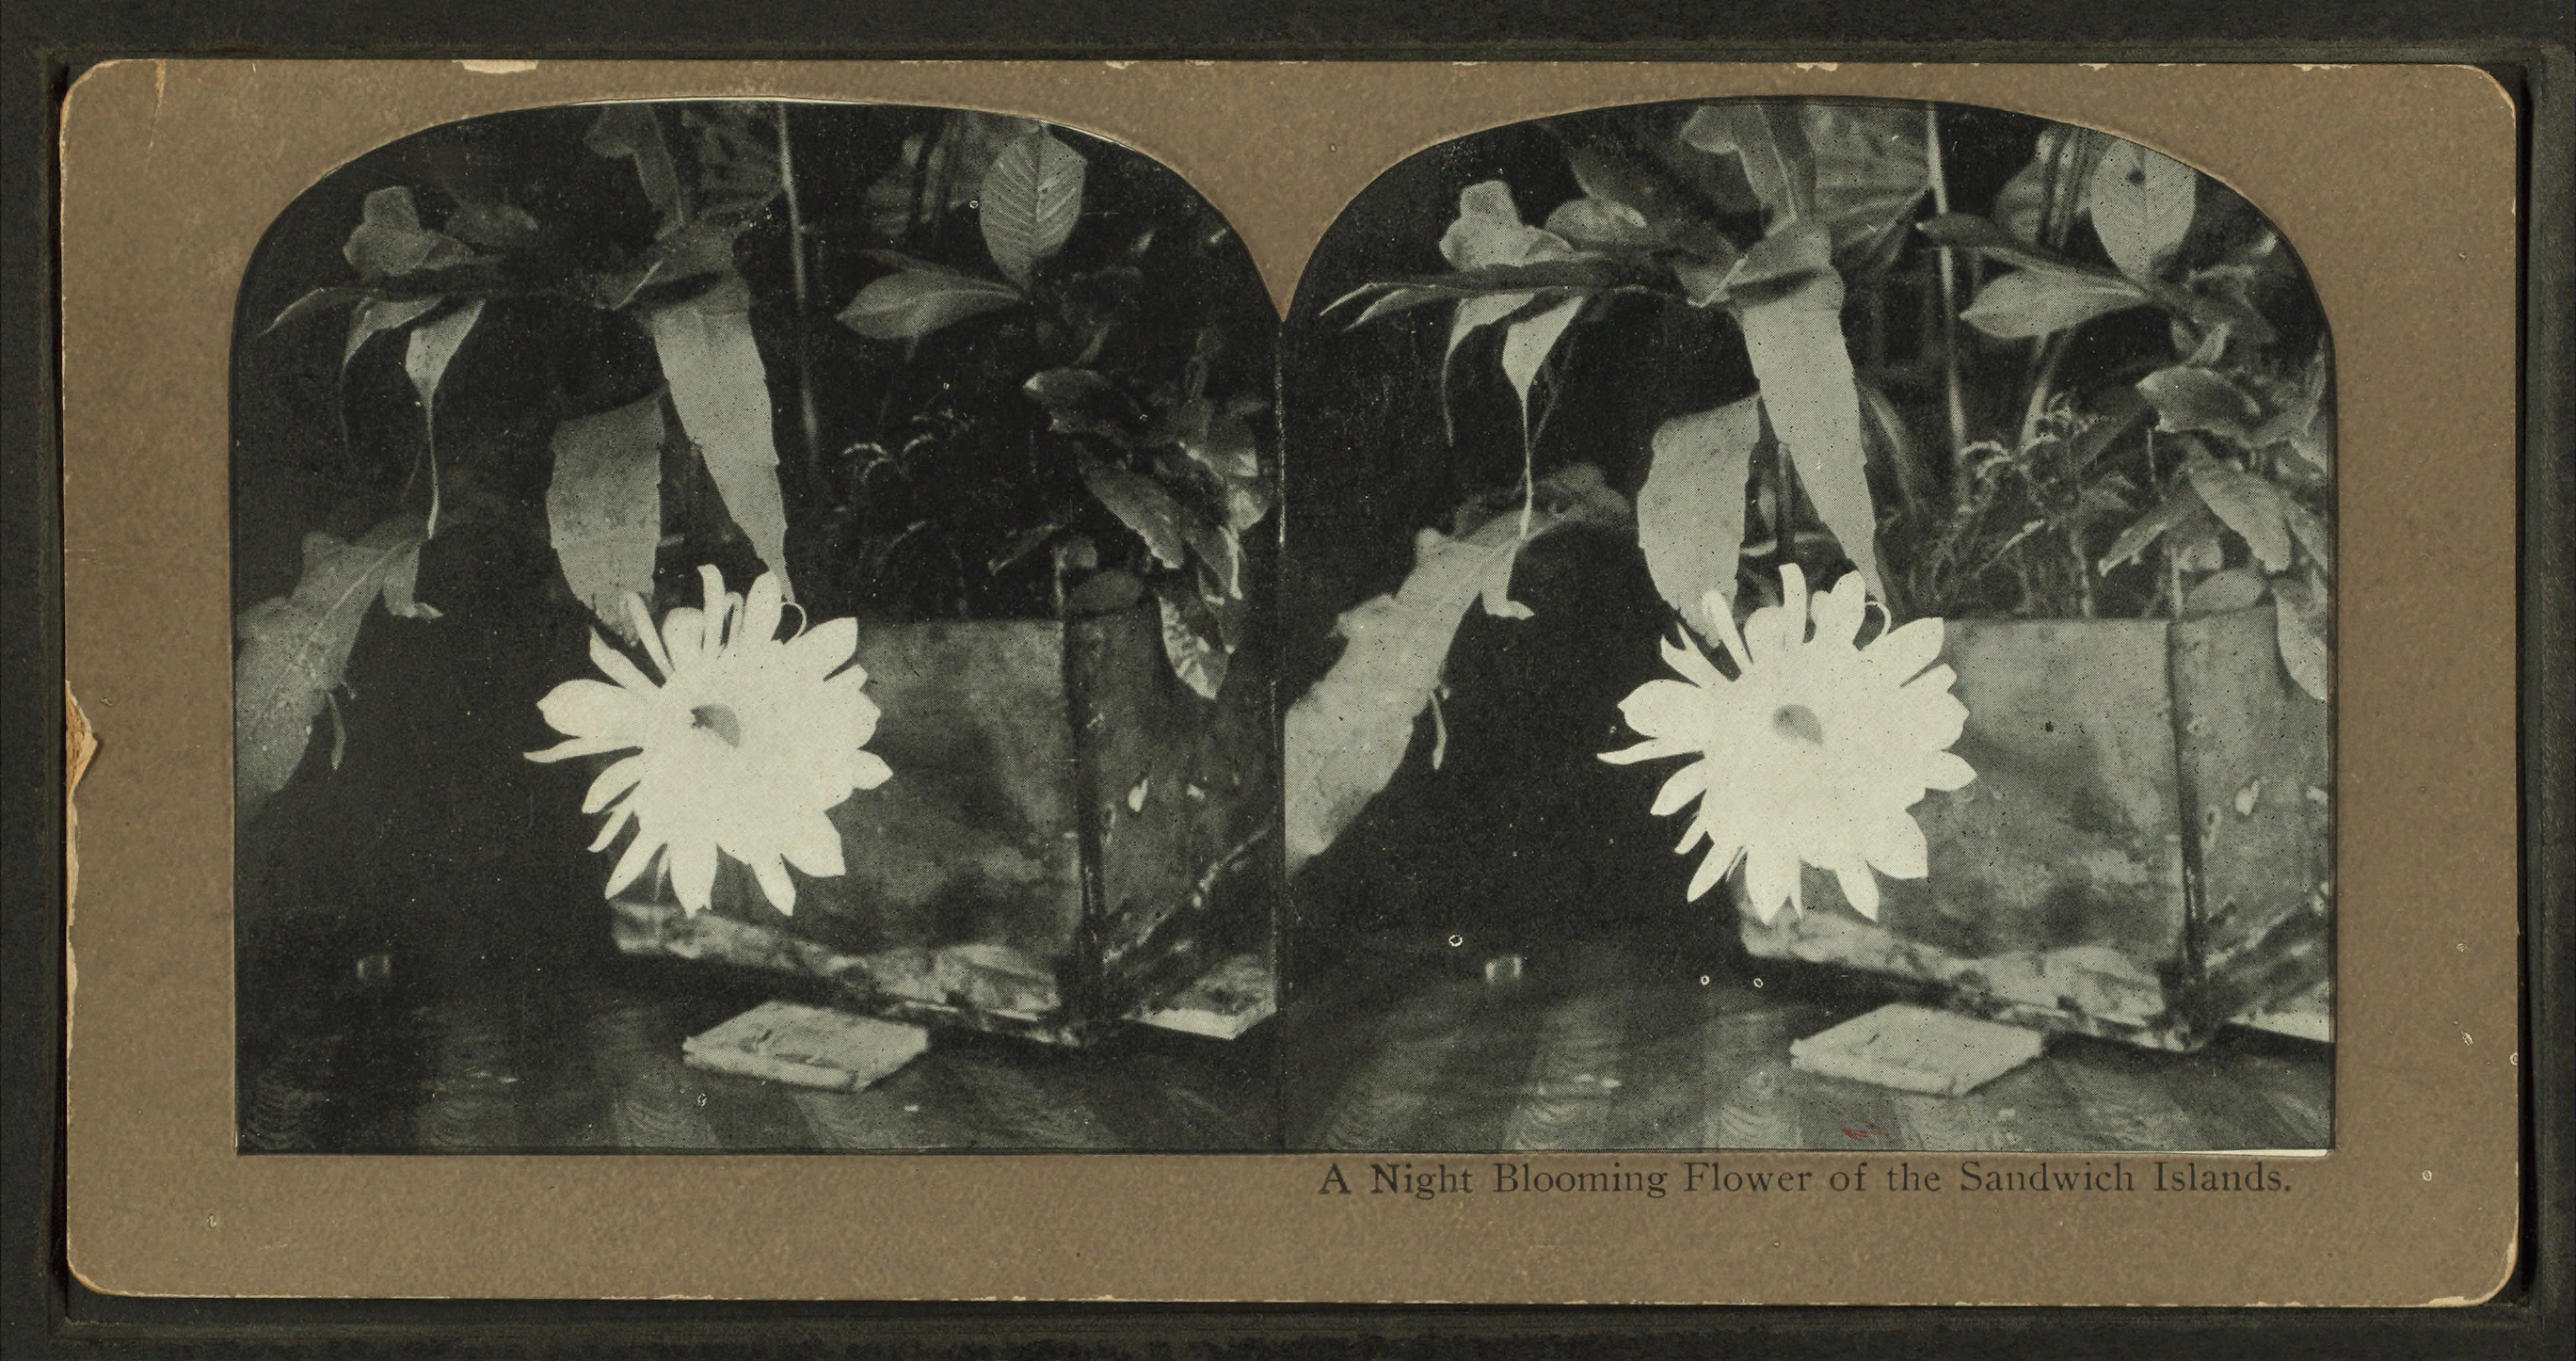 A night blooming flower of the Sandwich Islands, from Robert N. Dennis collection of stereoscopic views